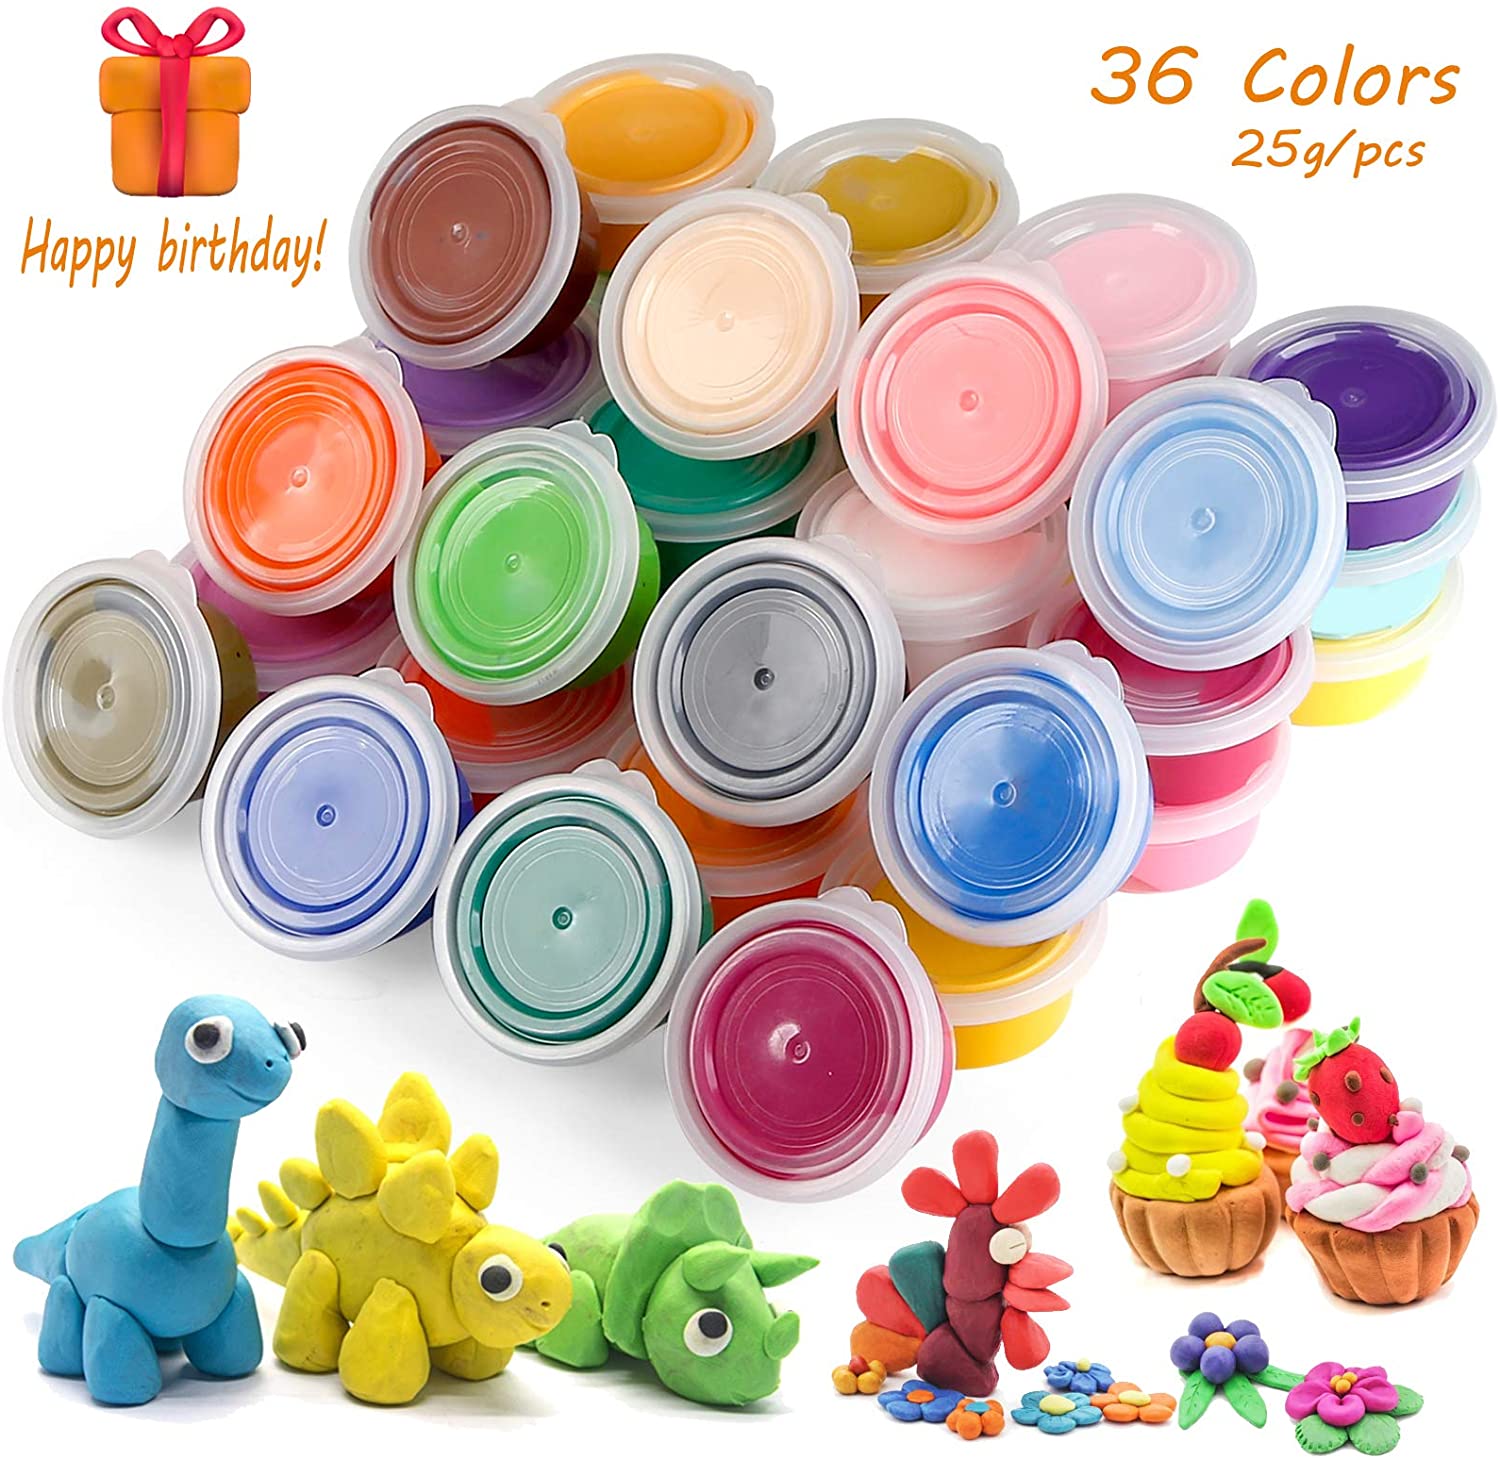 Toys, Modeling Clay Kit 5 Colors Air Dry Ultra Light Magic Clay With Tools